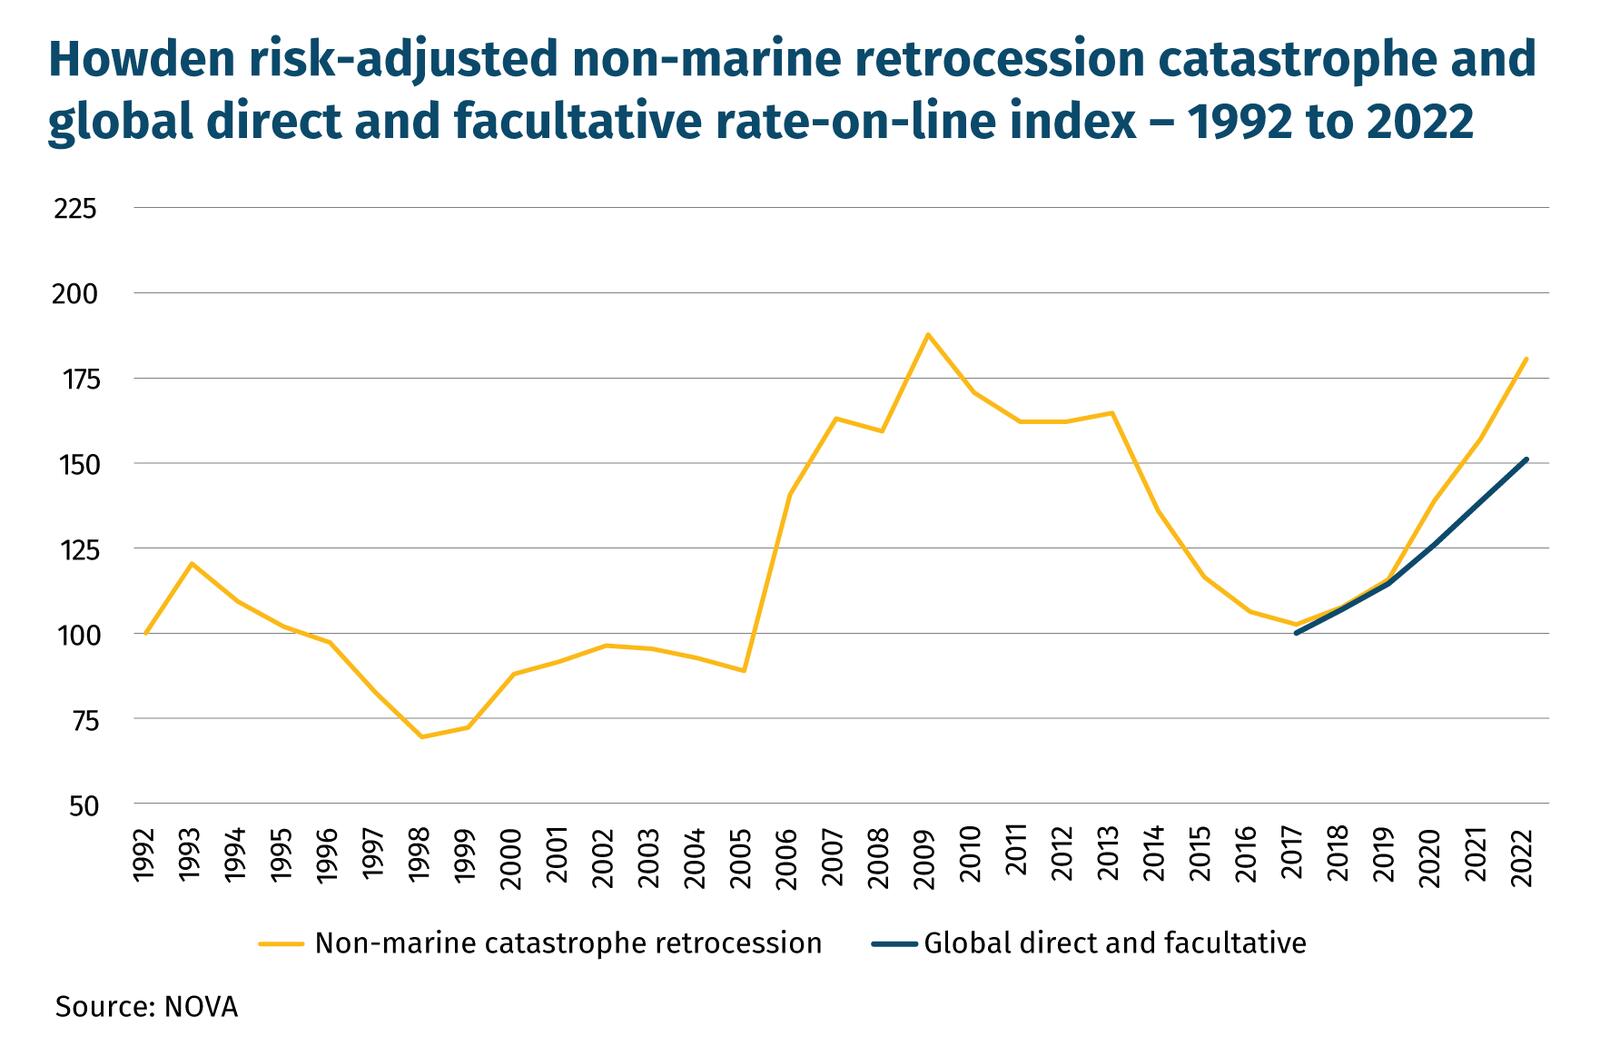 Howden risk-adjusted non-marine retrocession catastrophe and global direct and facultative rate-on-line index – 1992 to 2022  